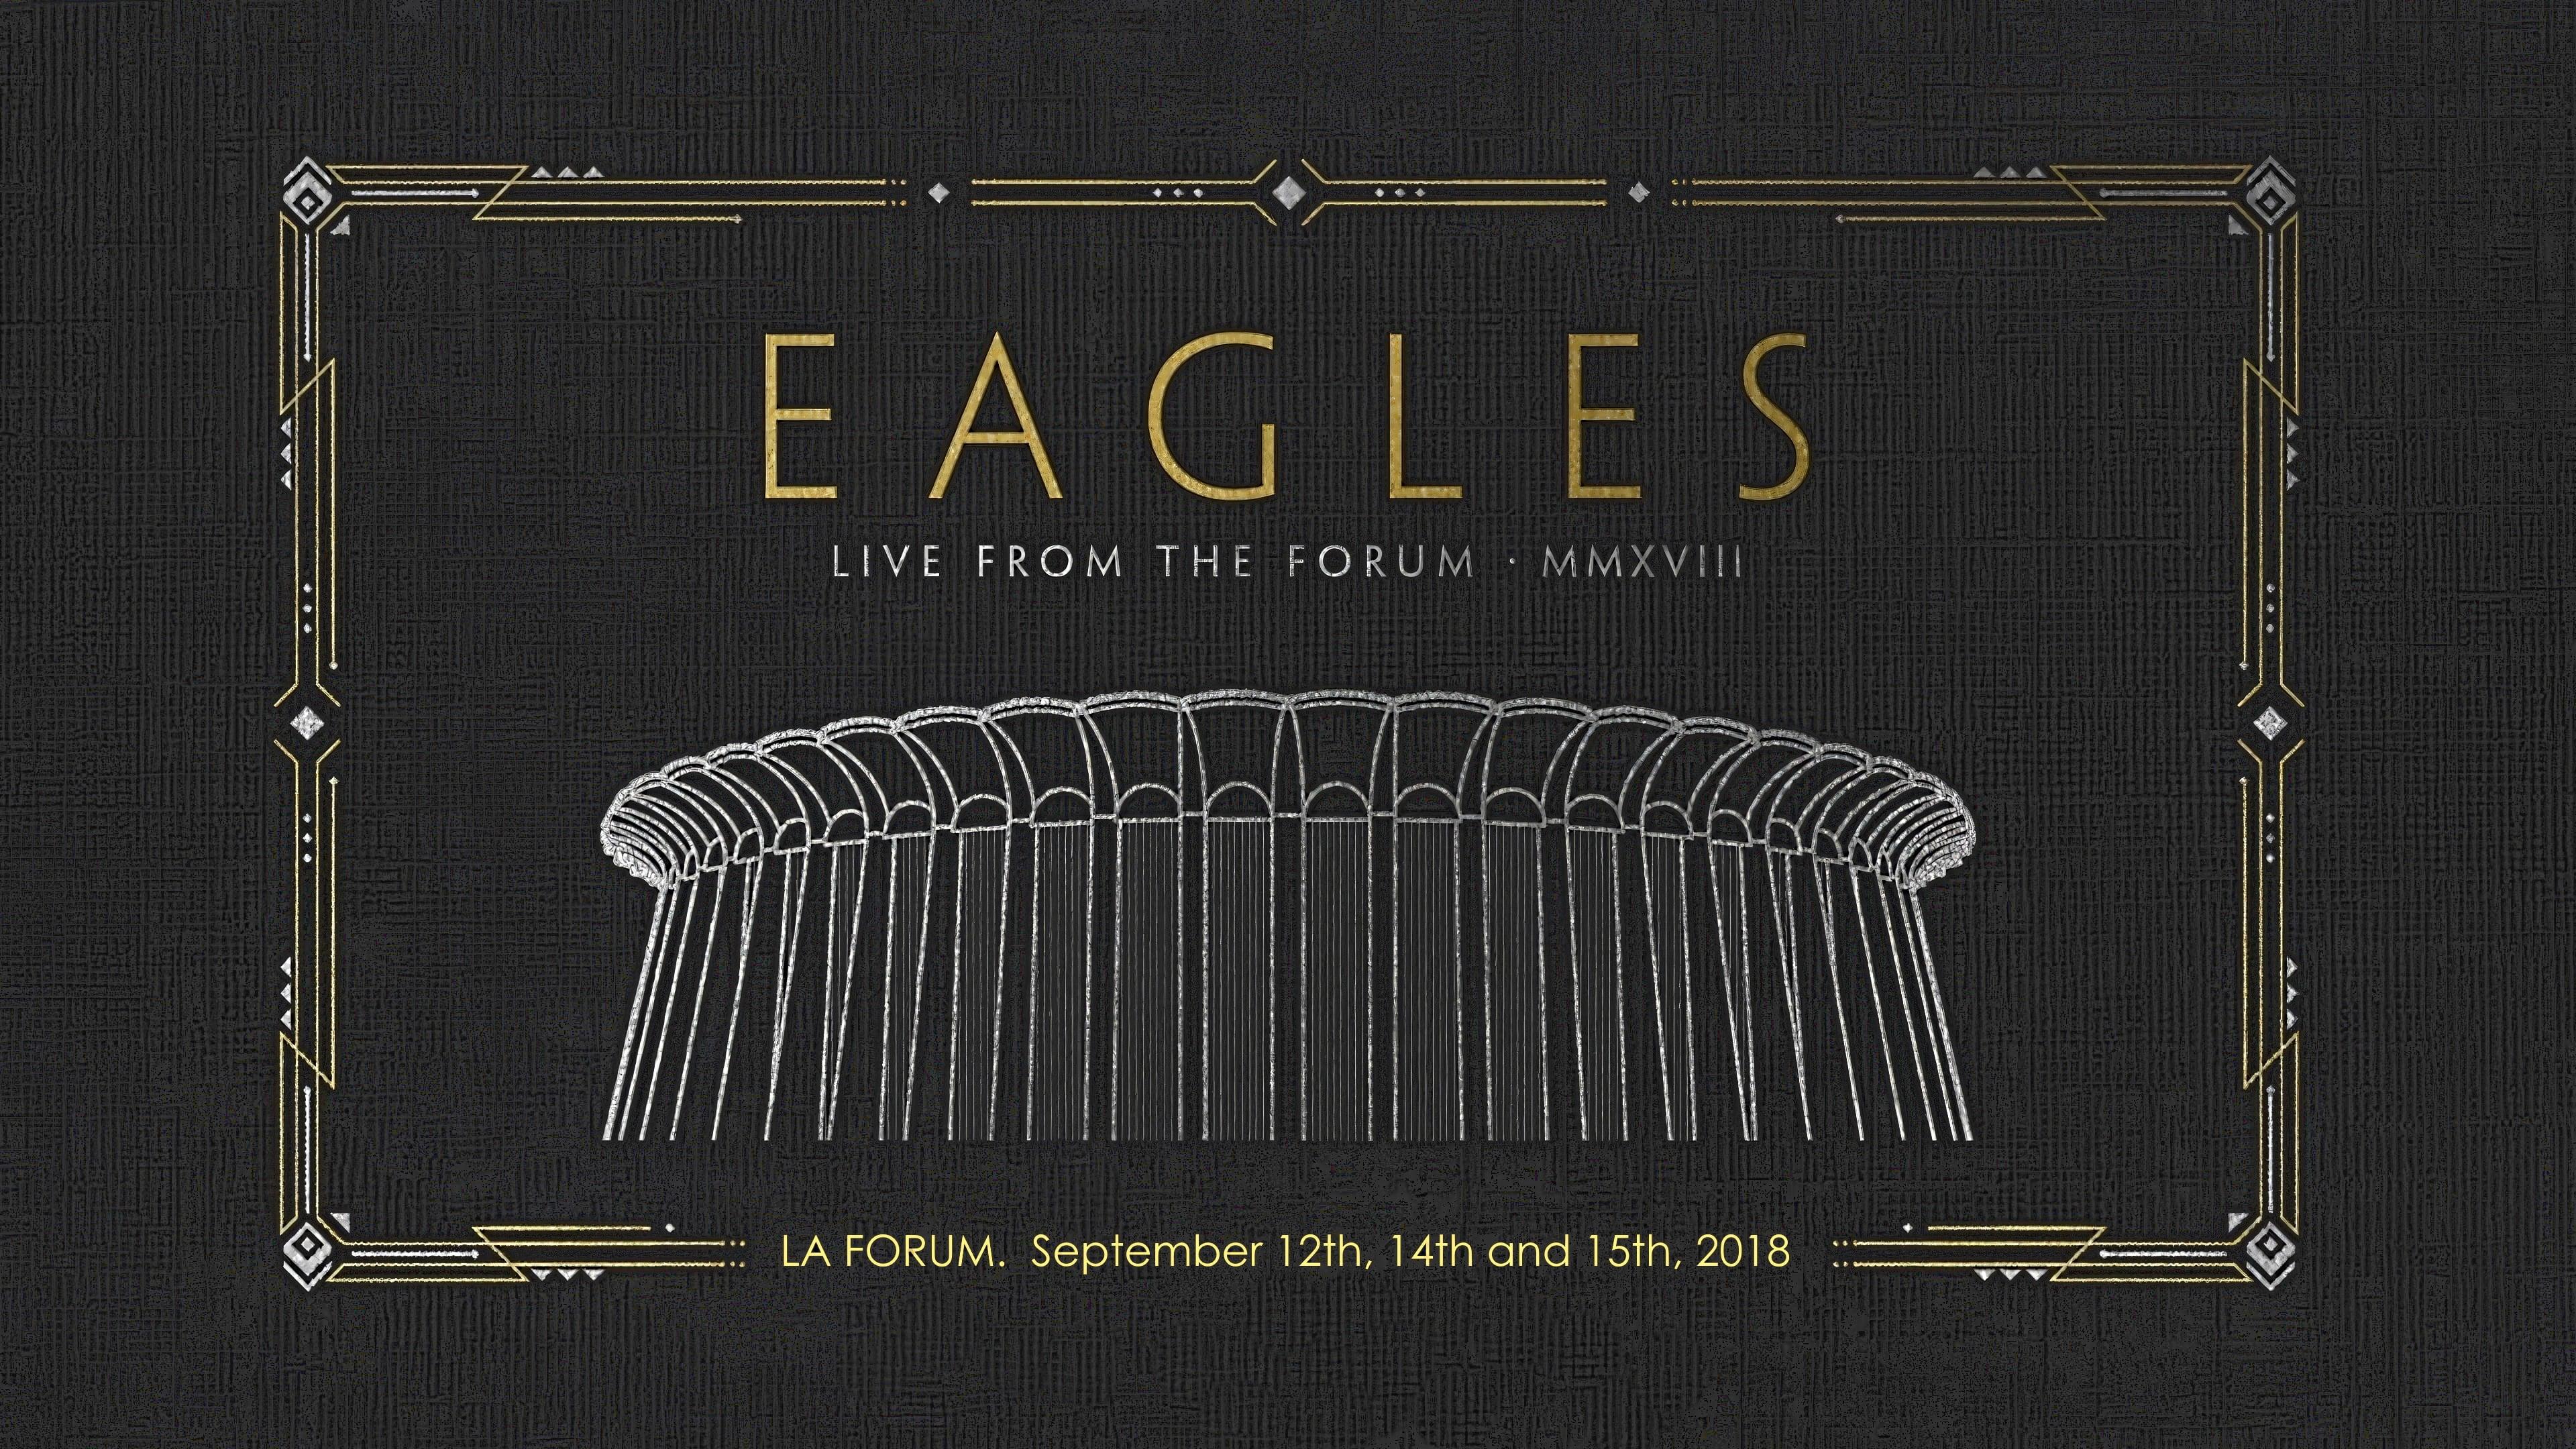 Eagles - Live from the Forum MMXVIII backdrop